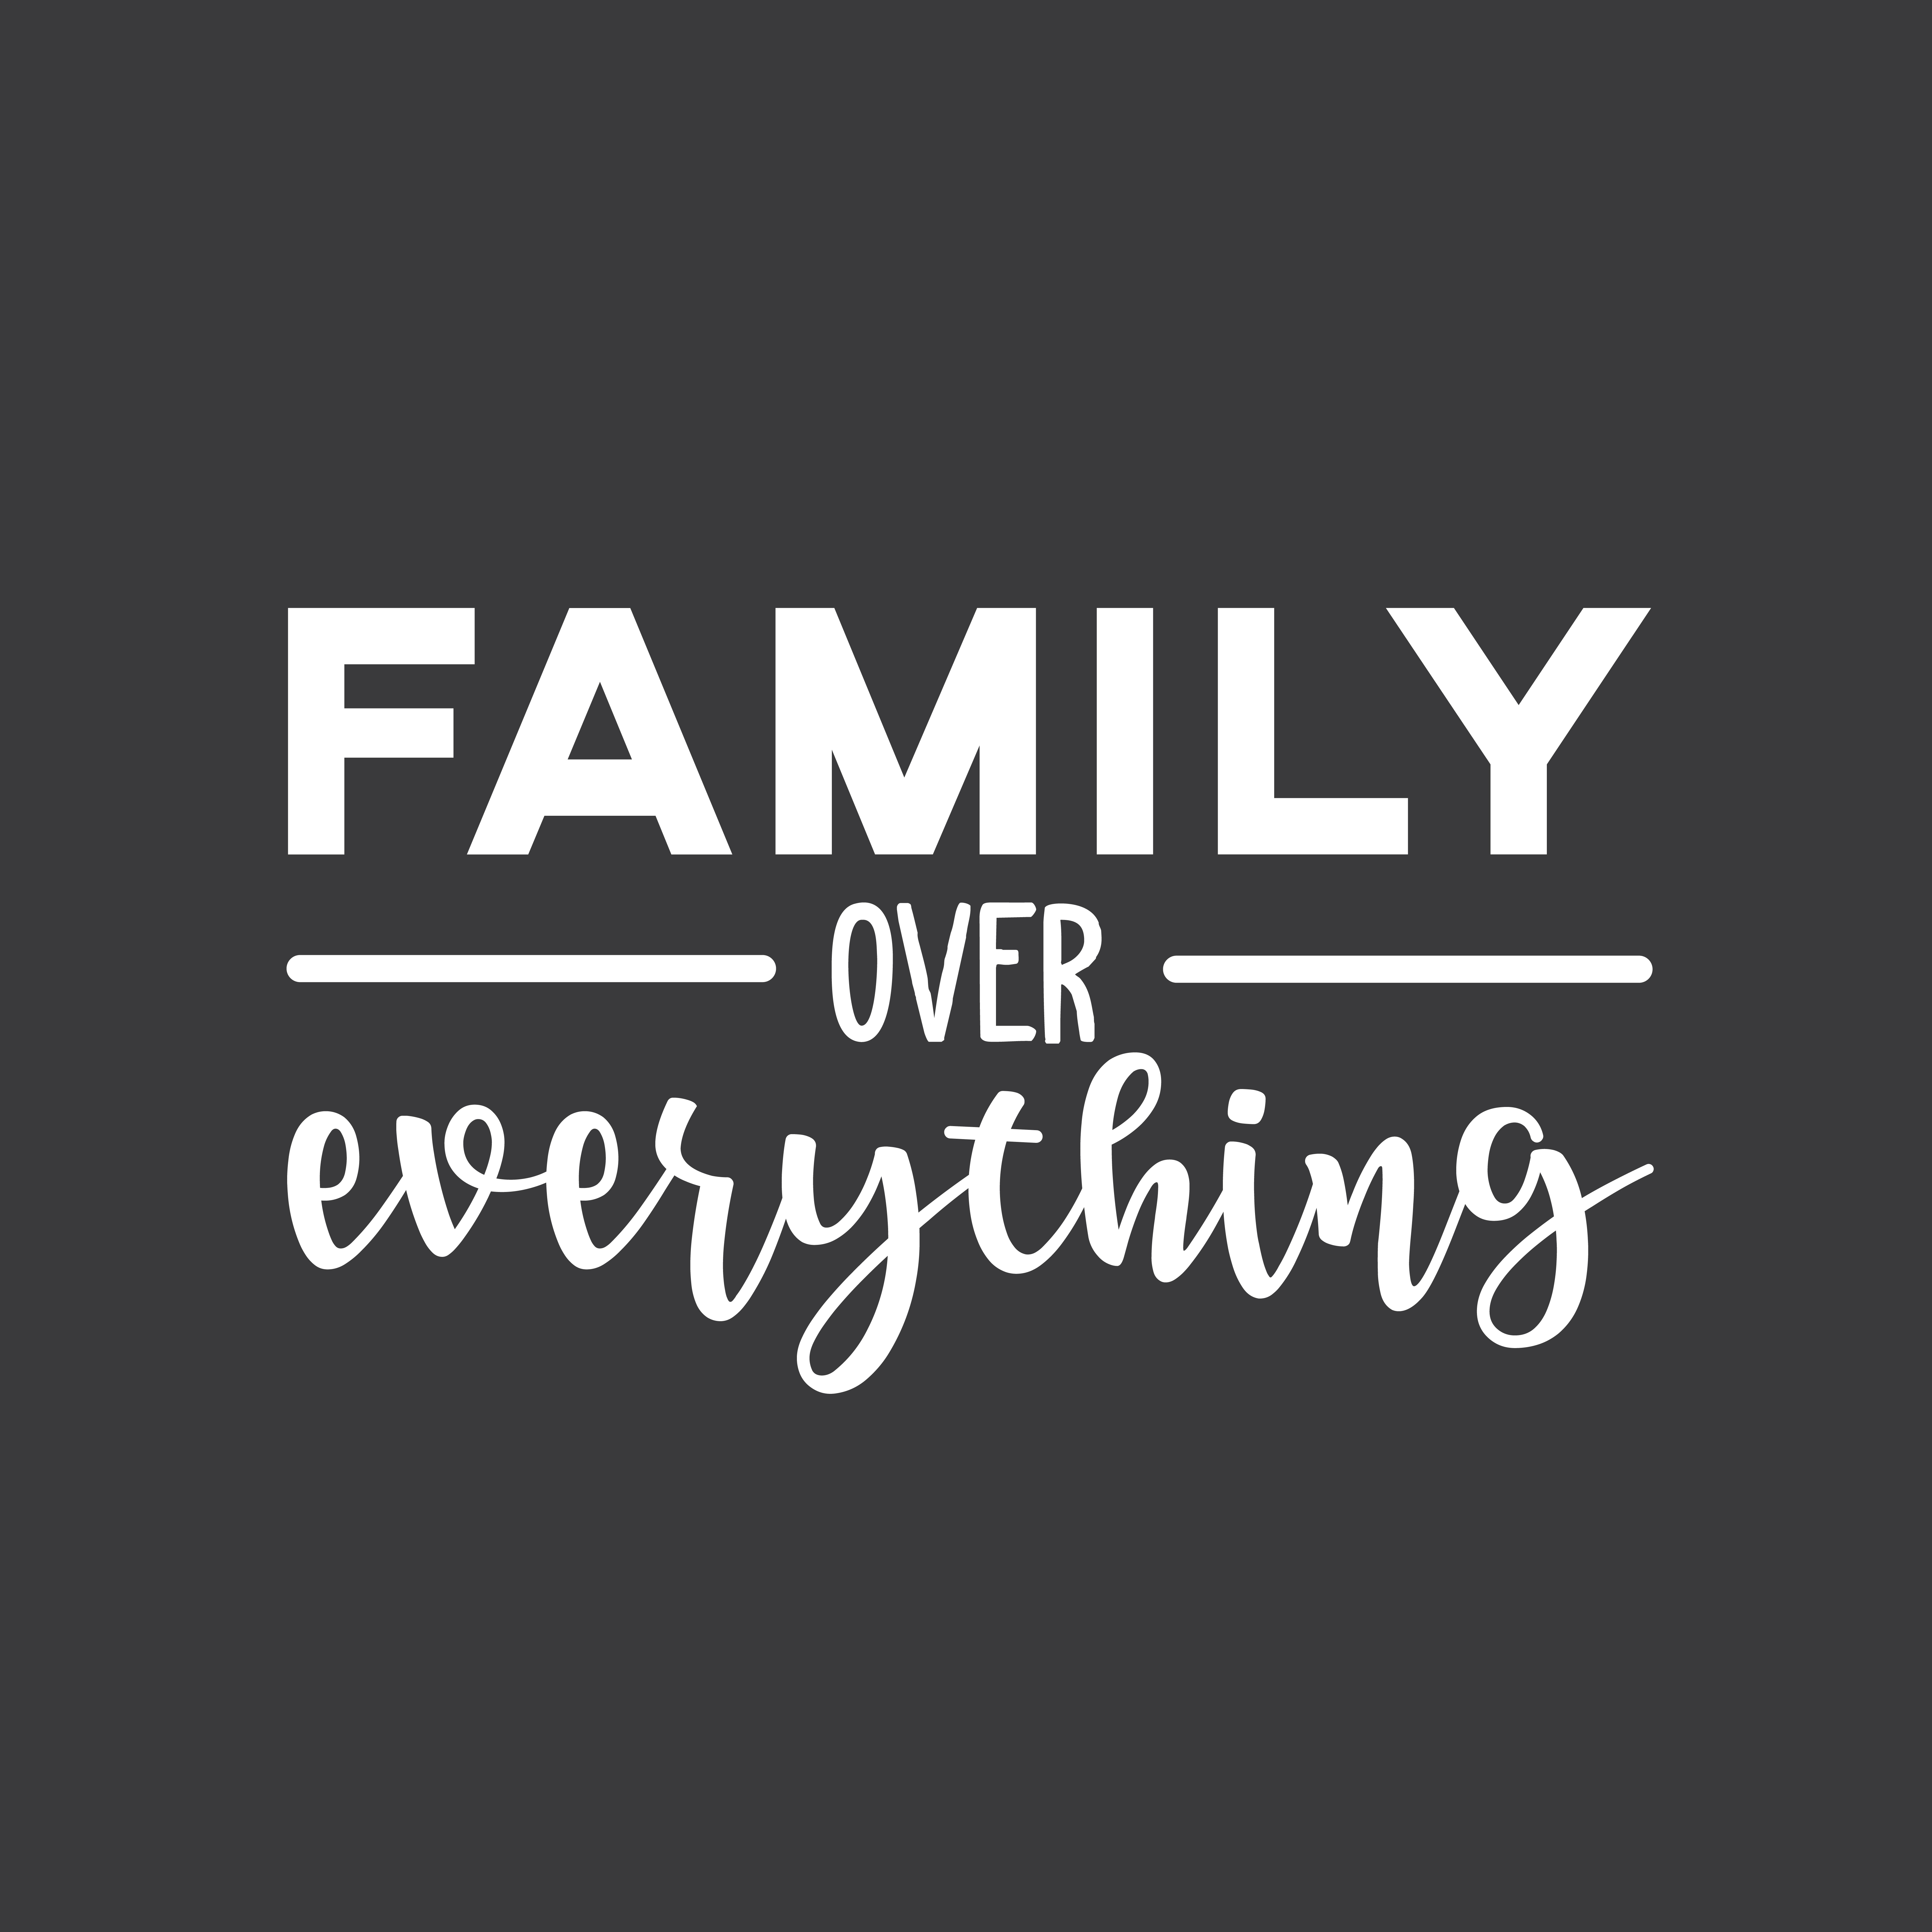 Vinyl Wall Art Decal - Family Over Everything - 17* x 29* - Modern ...